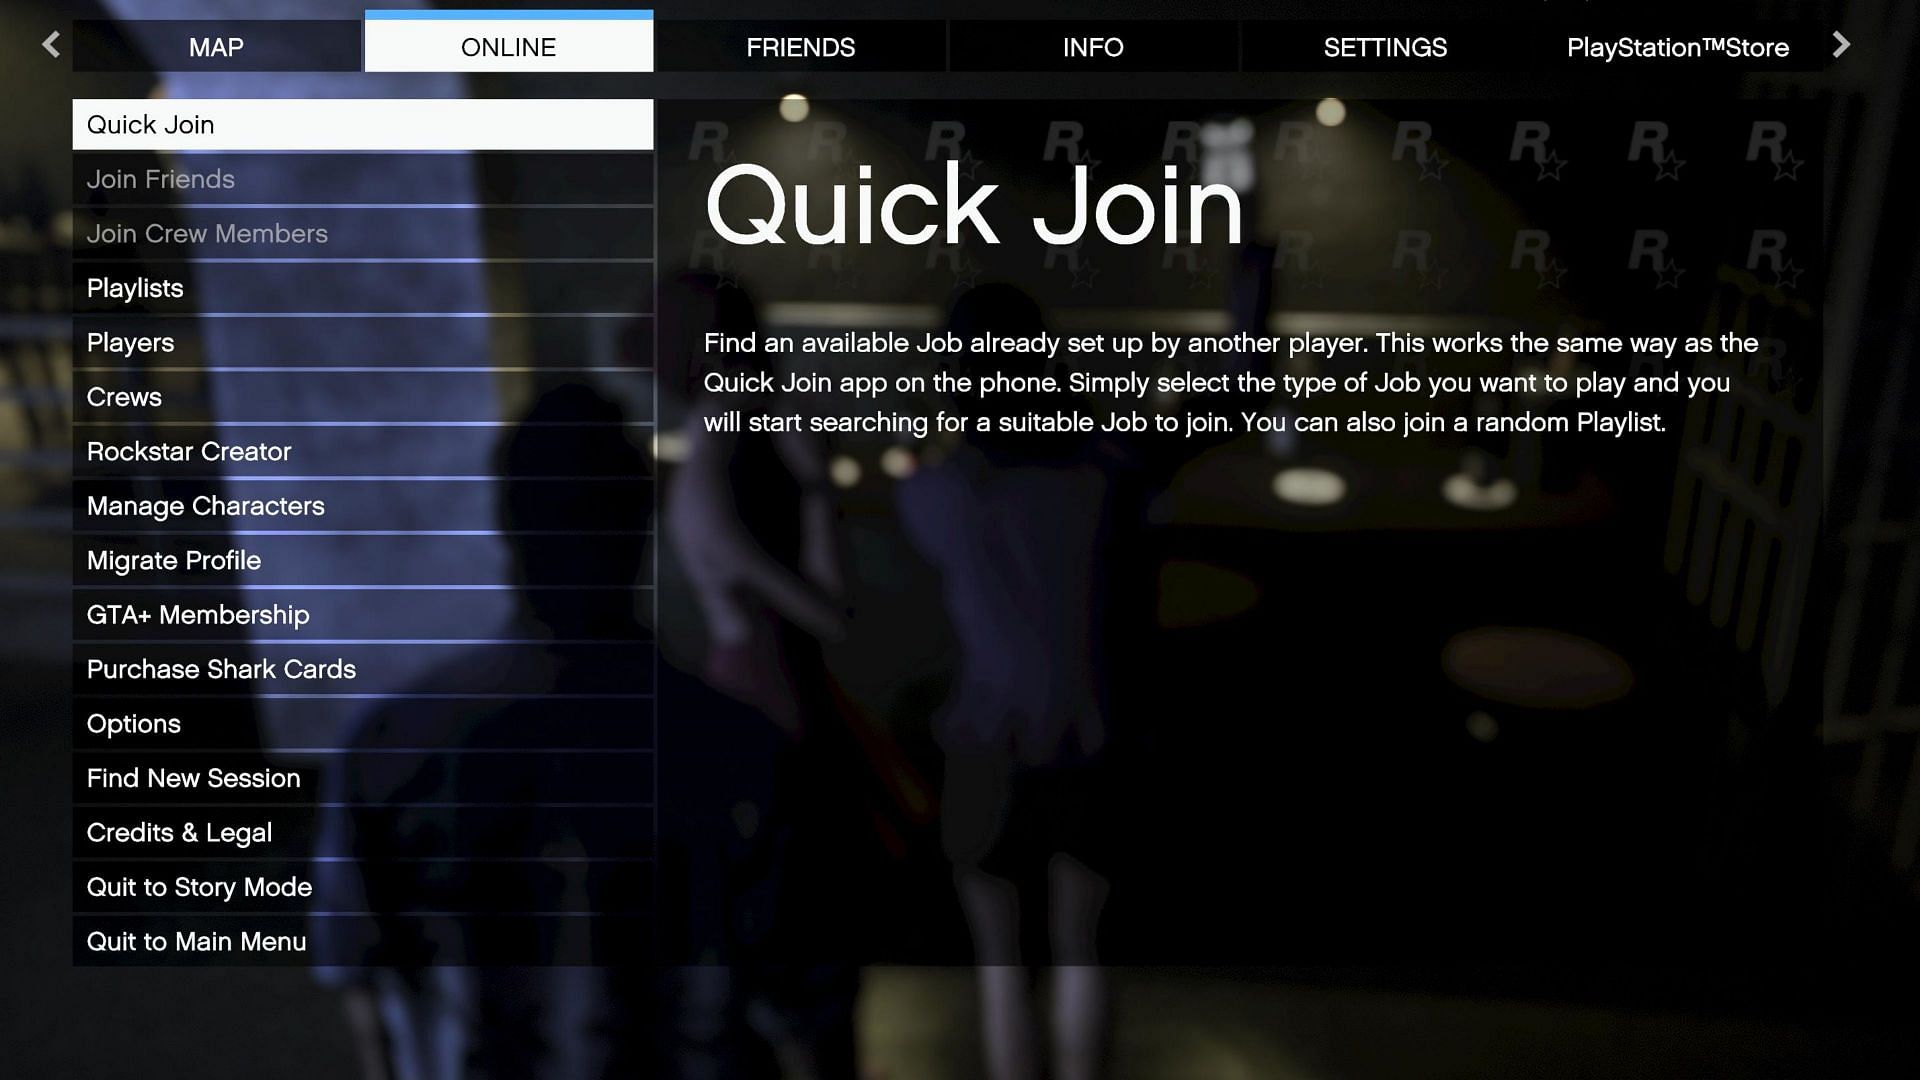 GTA 5 guide: how to start a Job or Playlist in GTA Online